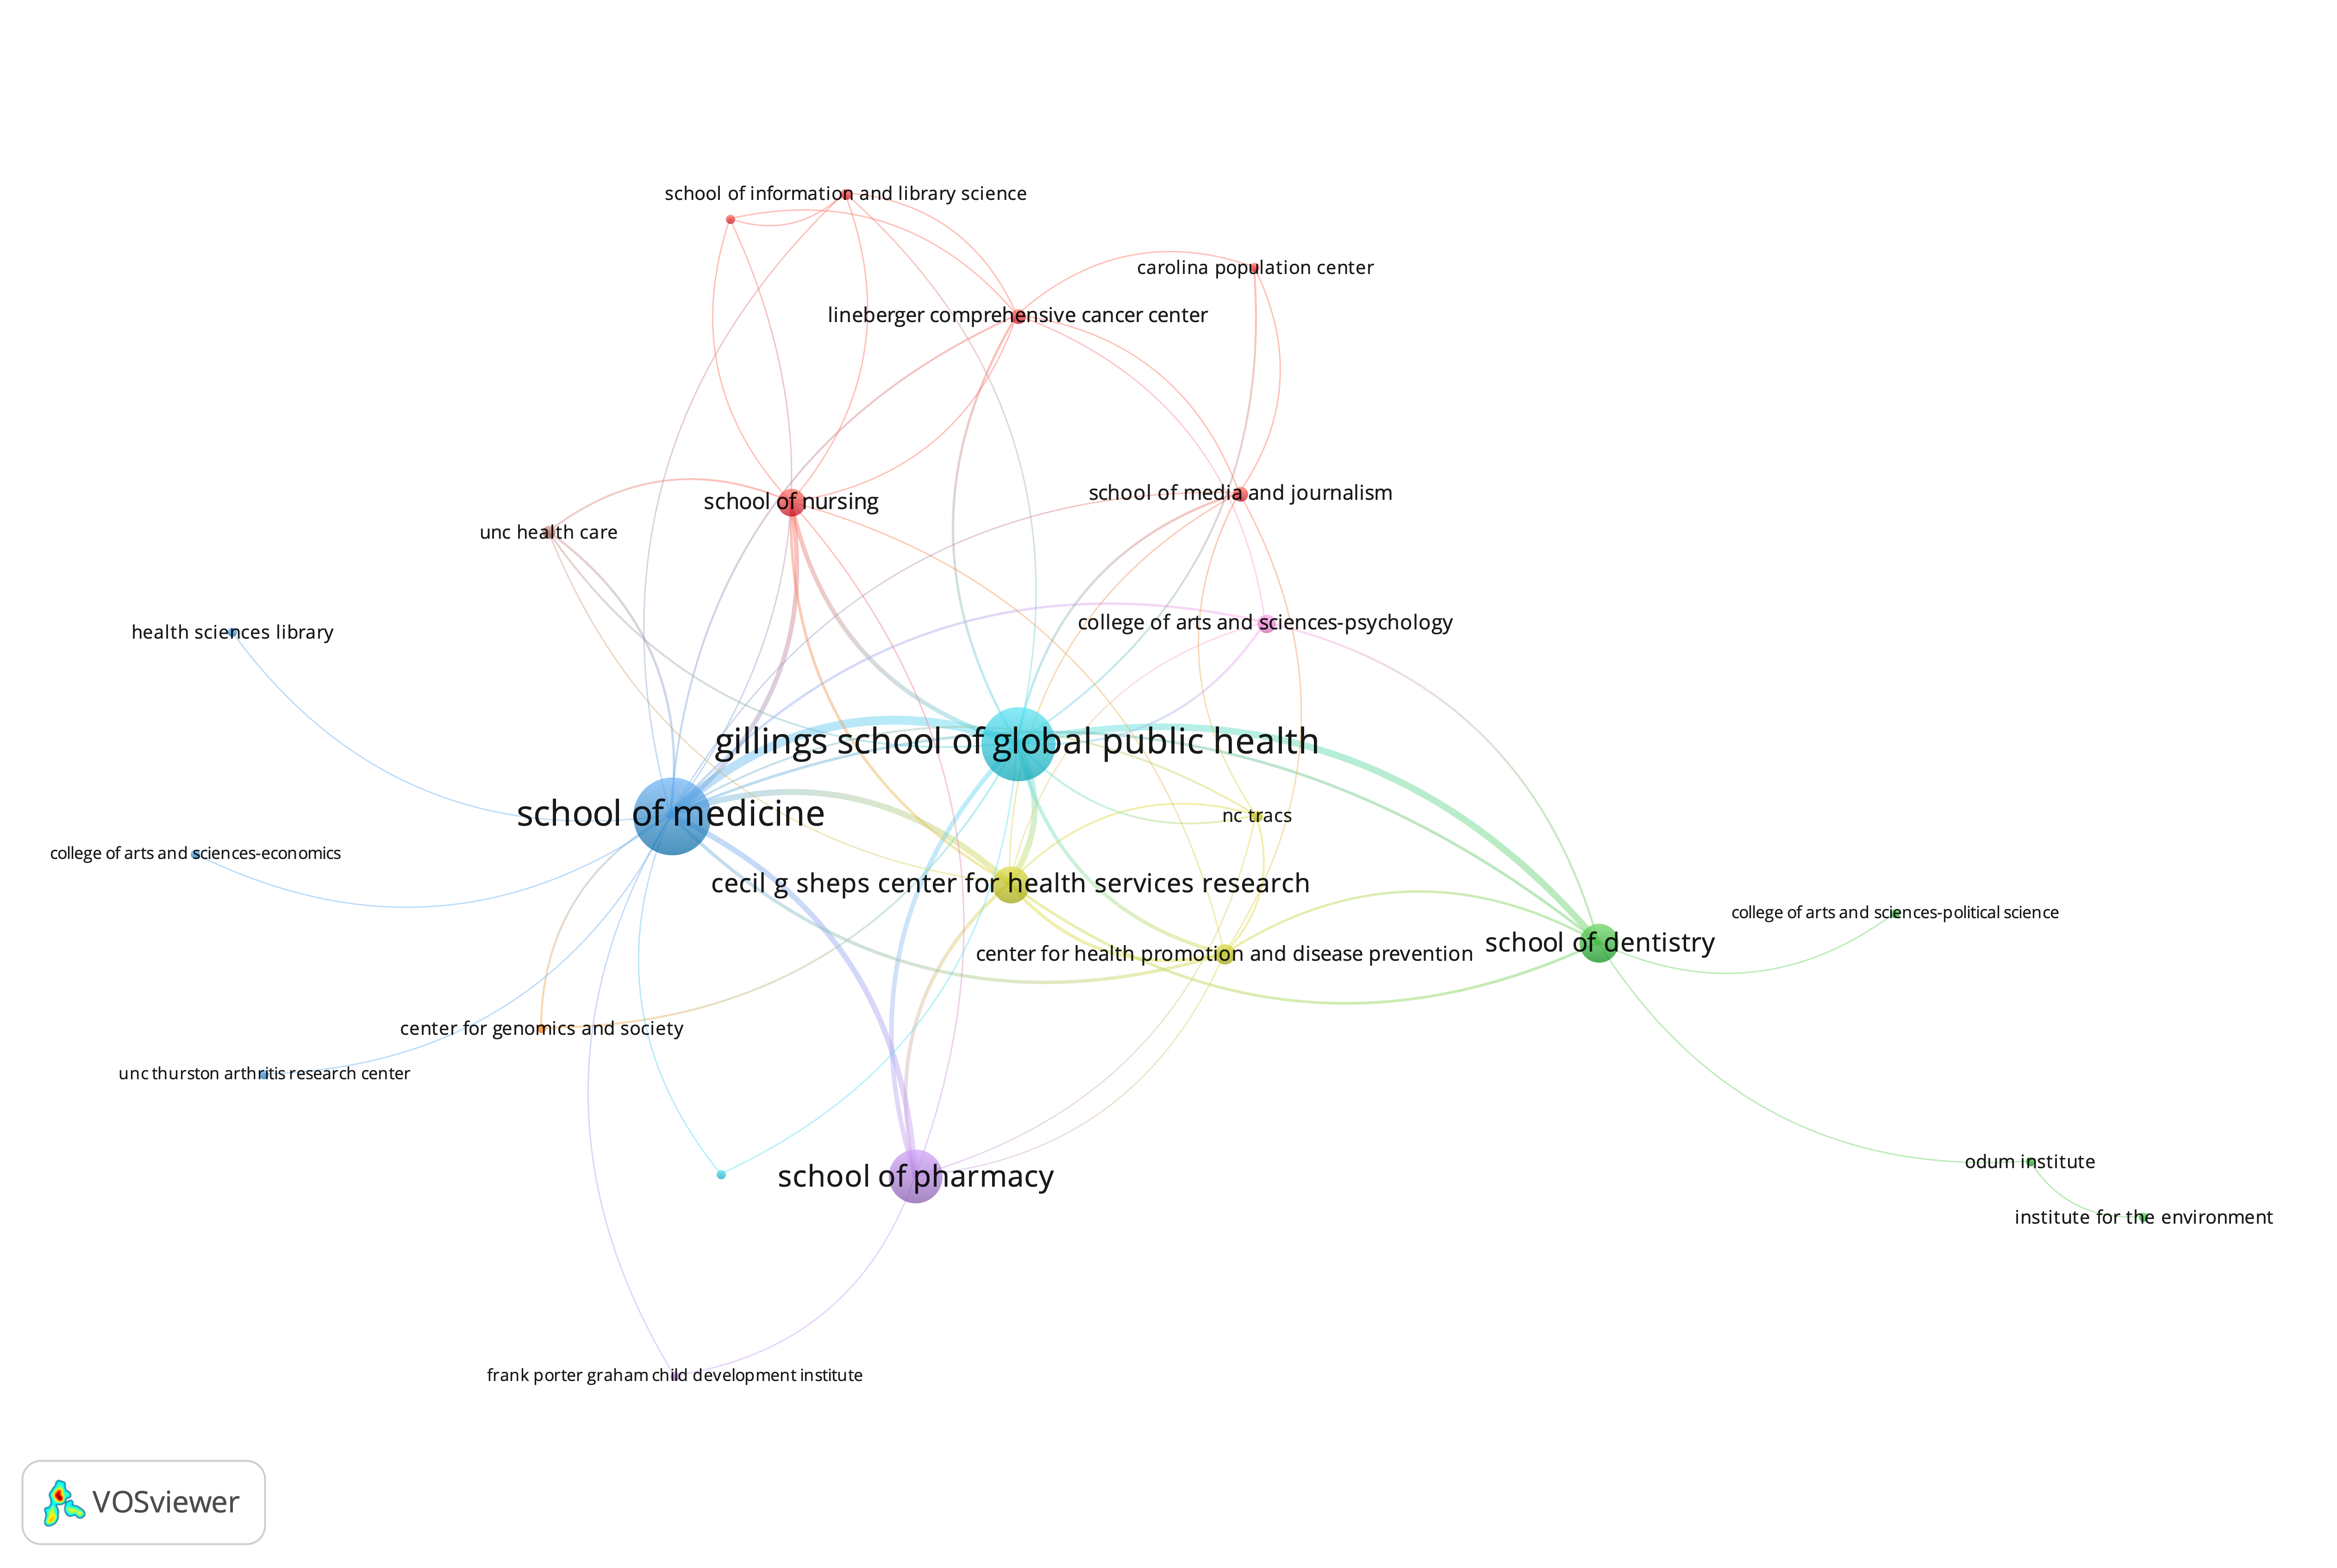 Visualization represents collaborations within UNC, regarding the field of health literacy